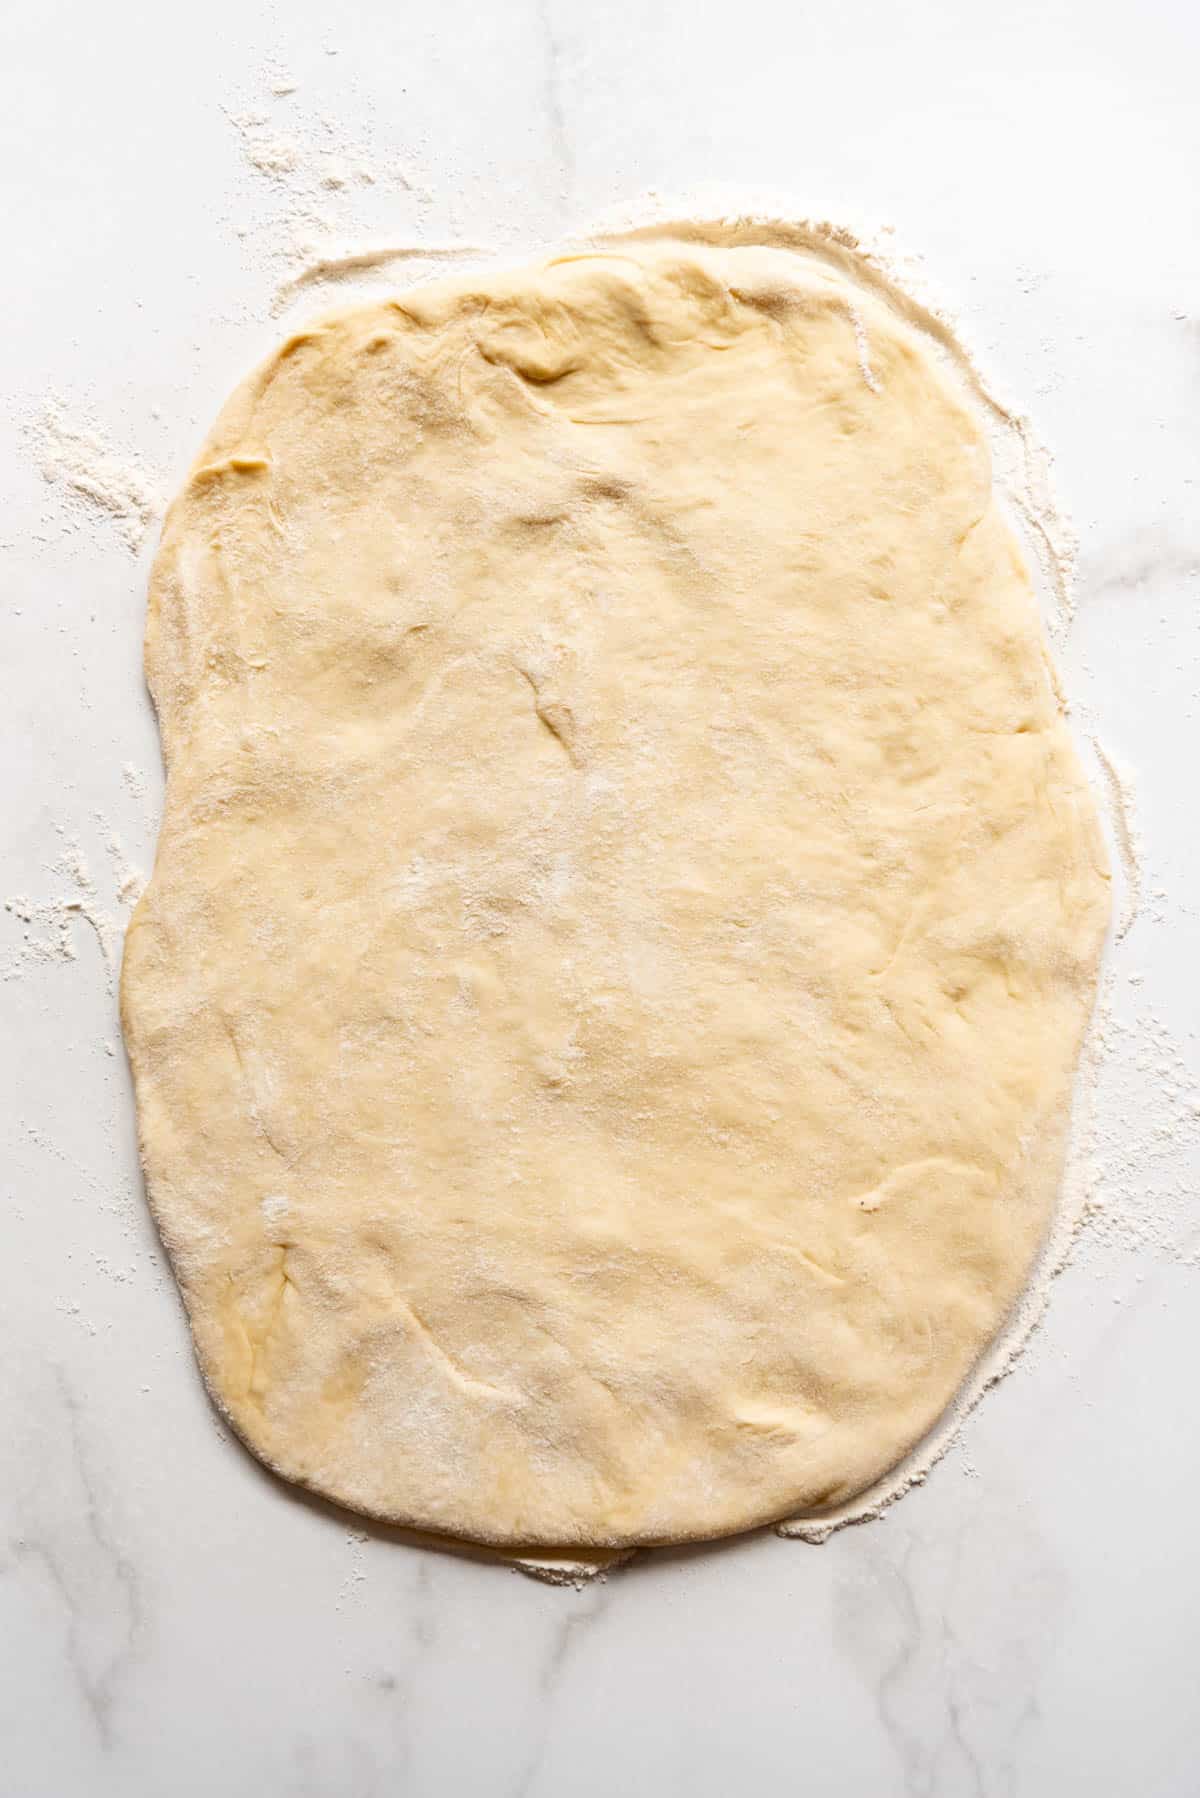 Rolling out soft roll dough onto a floured surface.